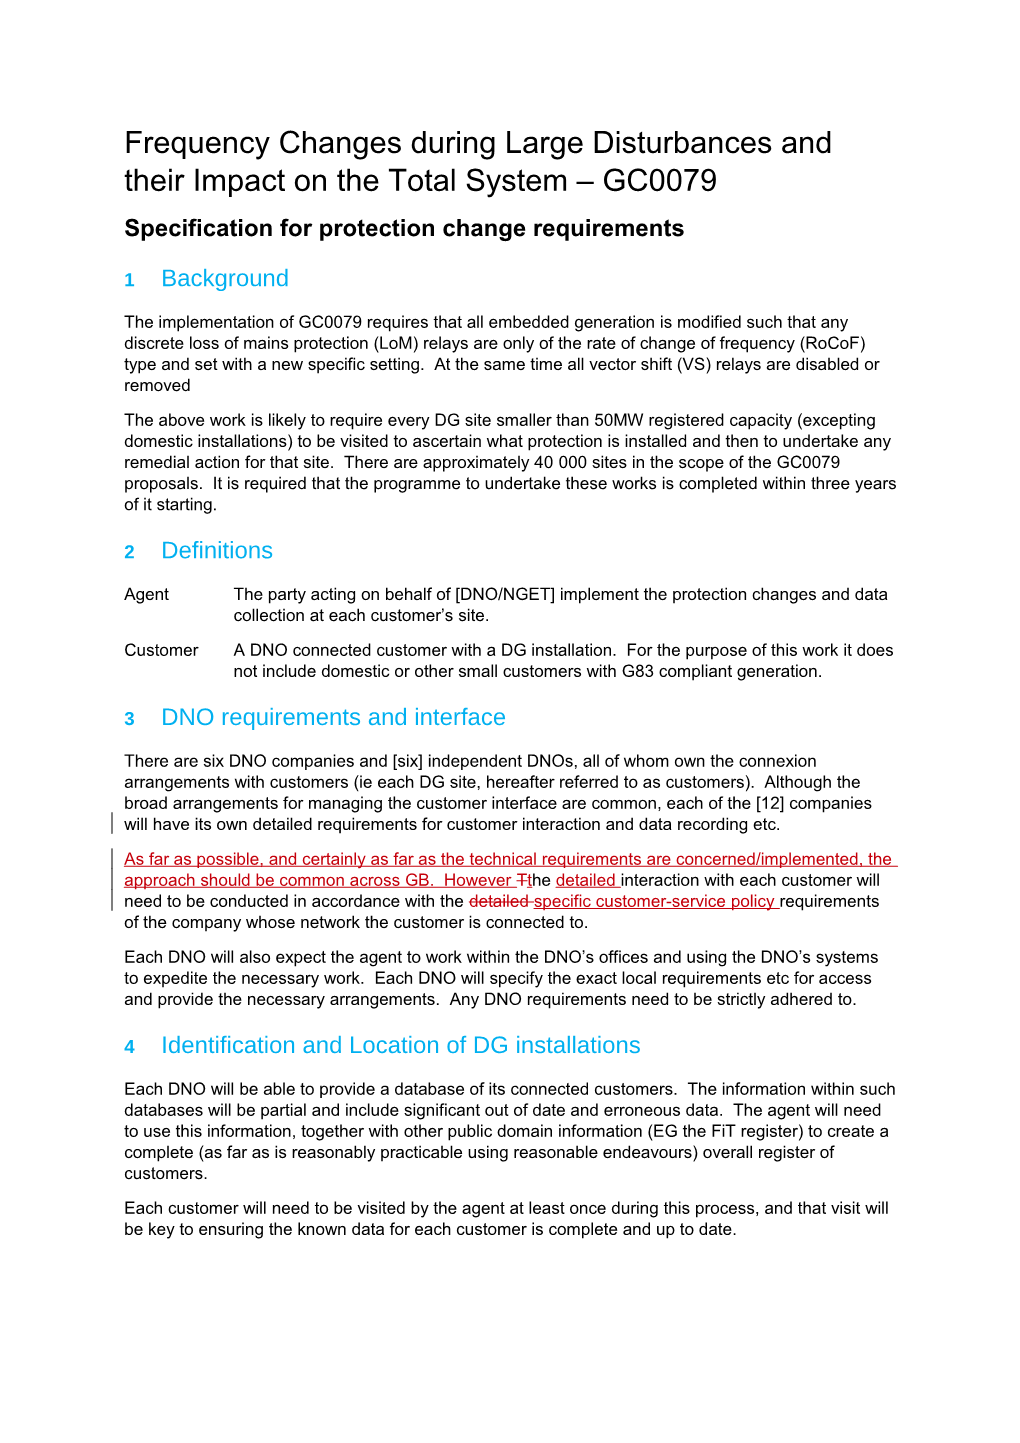 Specification for Protection Change Requirements